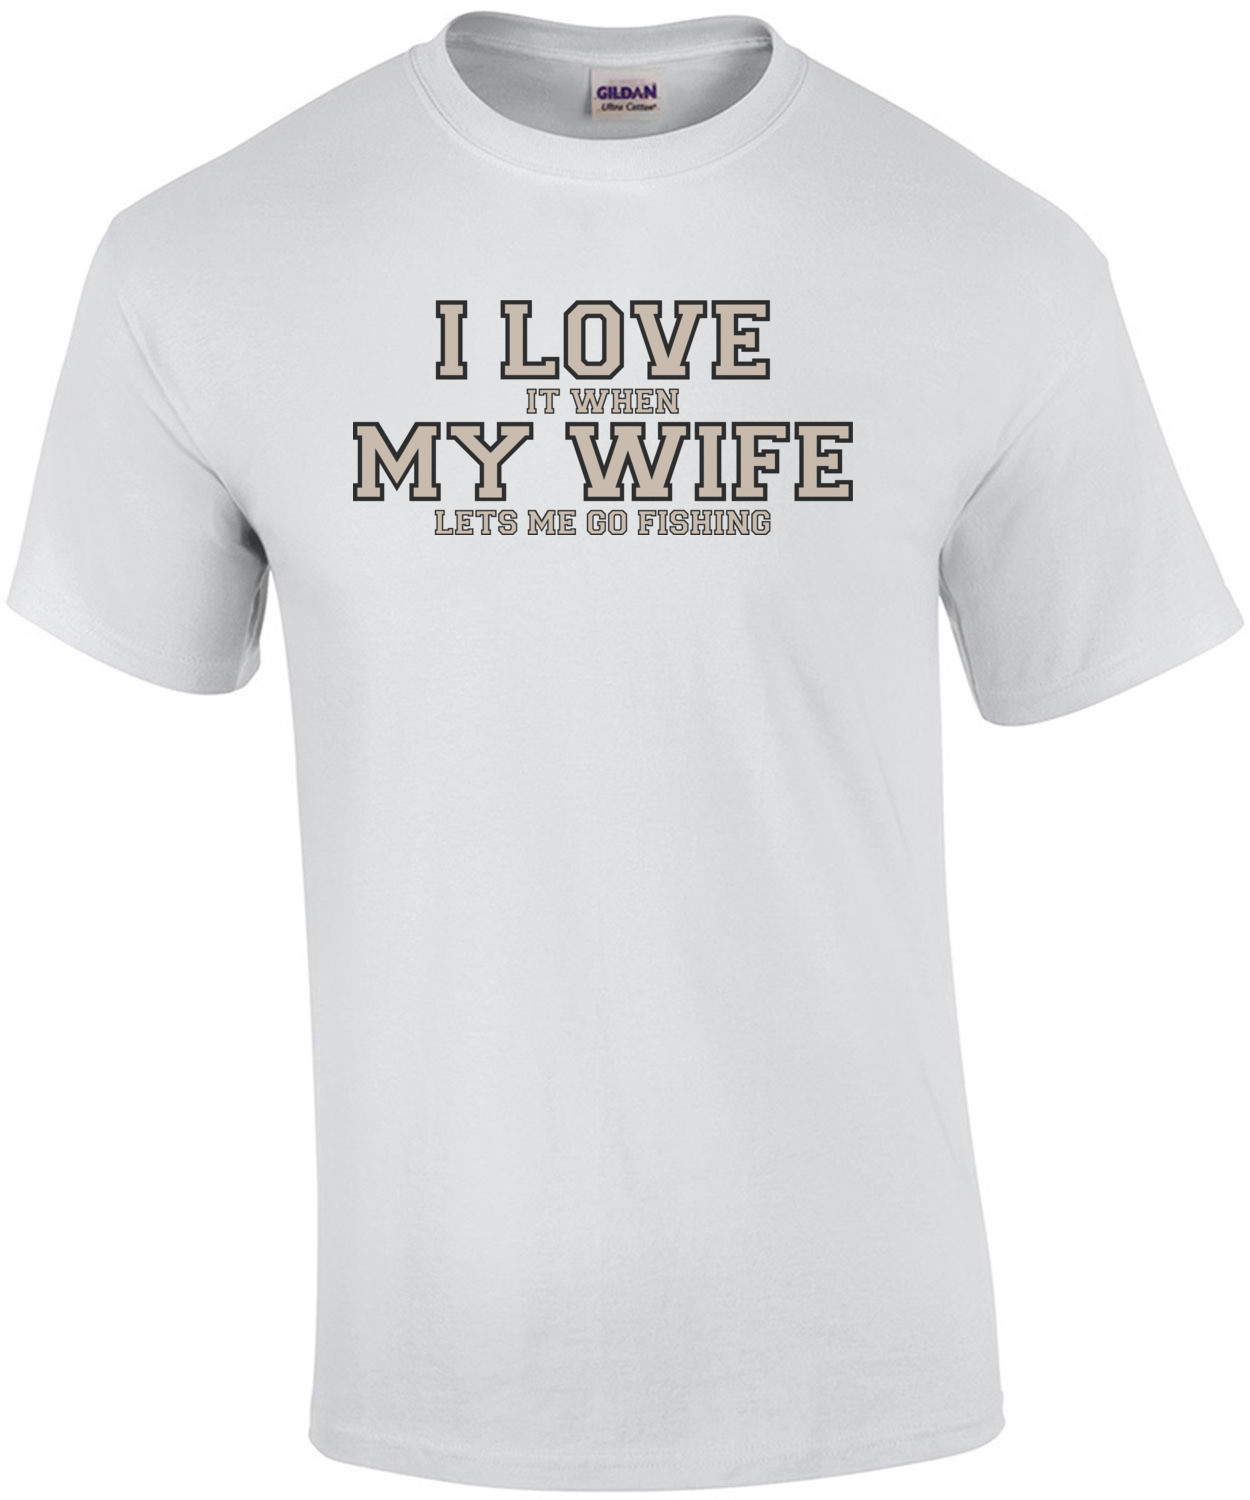 I love it when my wife lets me go fishing - Funny T-Shirt